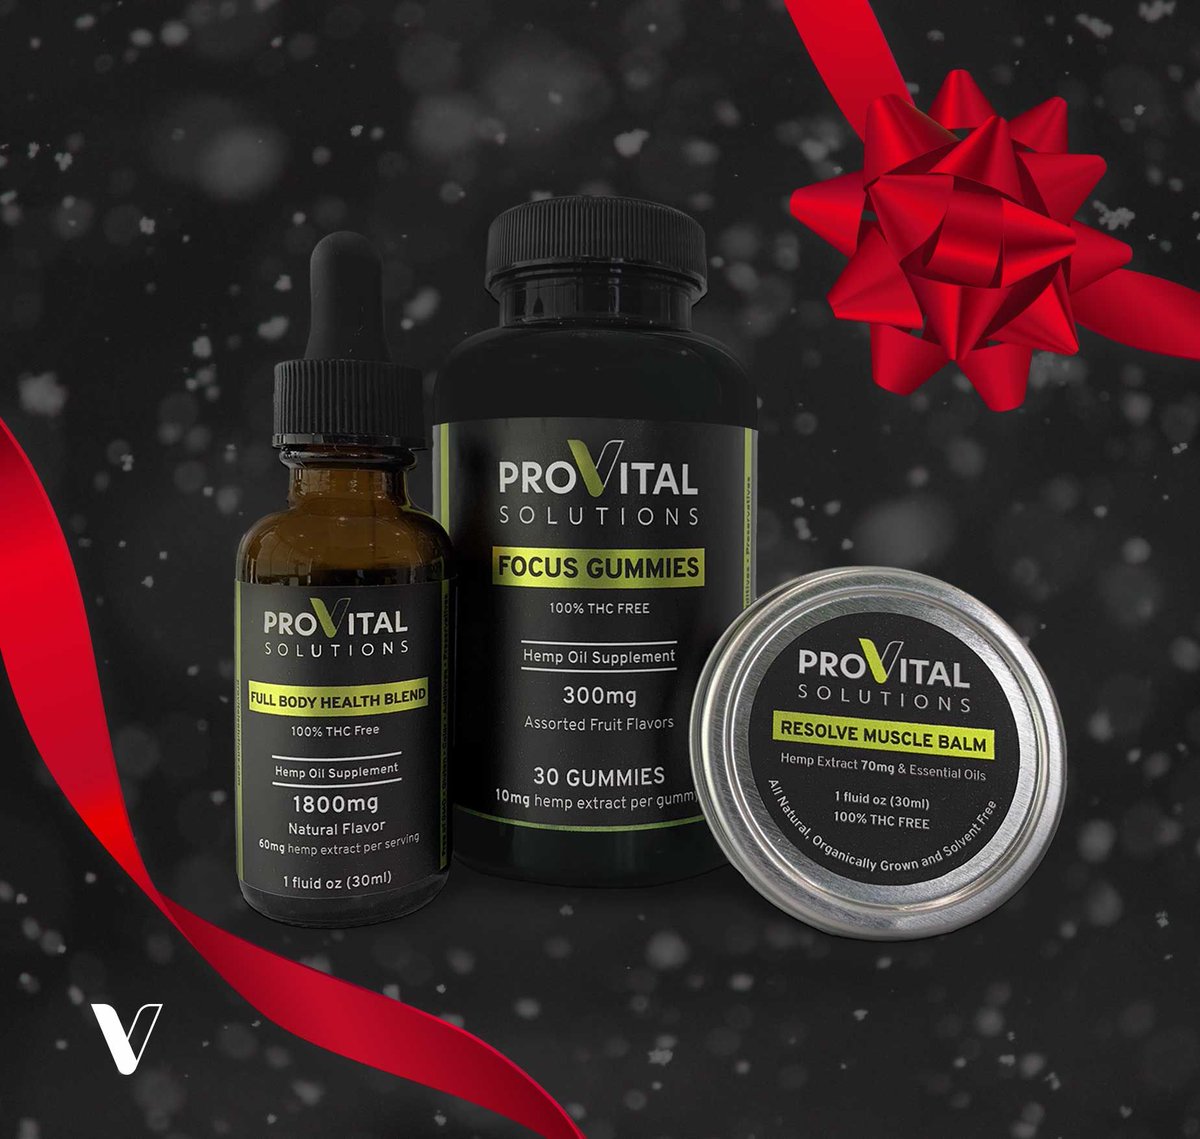 🌱 #HolidaySALE 🌱 Haven't got your Christmas gifts yet? Don't fret — we've got a sale just in time for the holidays! 🎄 All of our #hempoil supplements are buy one, get one 50 percent off for a limited time! 🎁 Now's the time to give the gift of #naturalwellness! 🌿